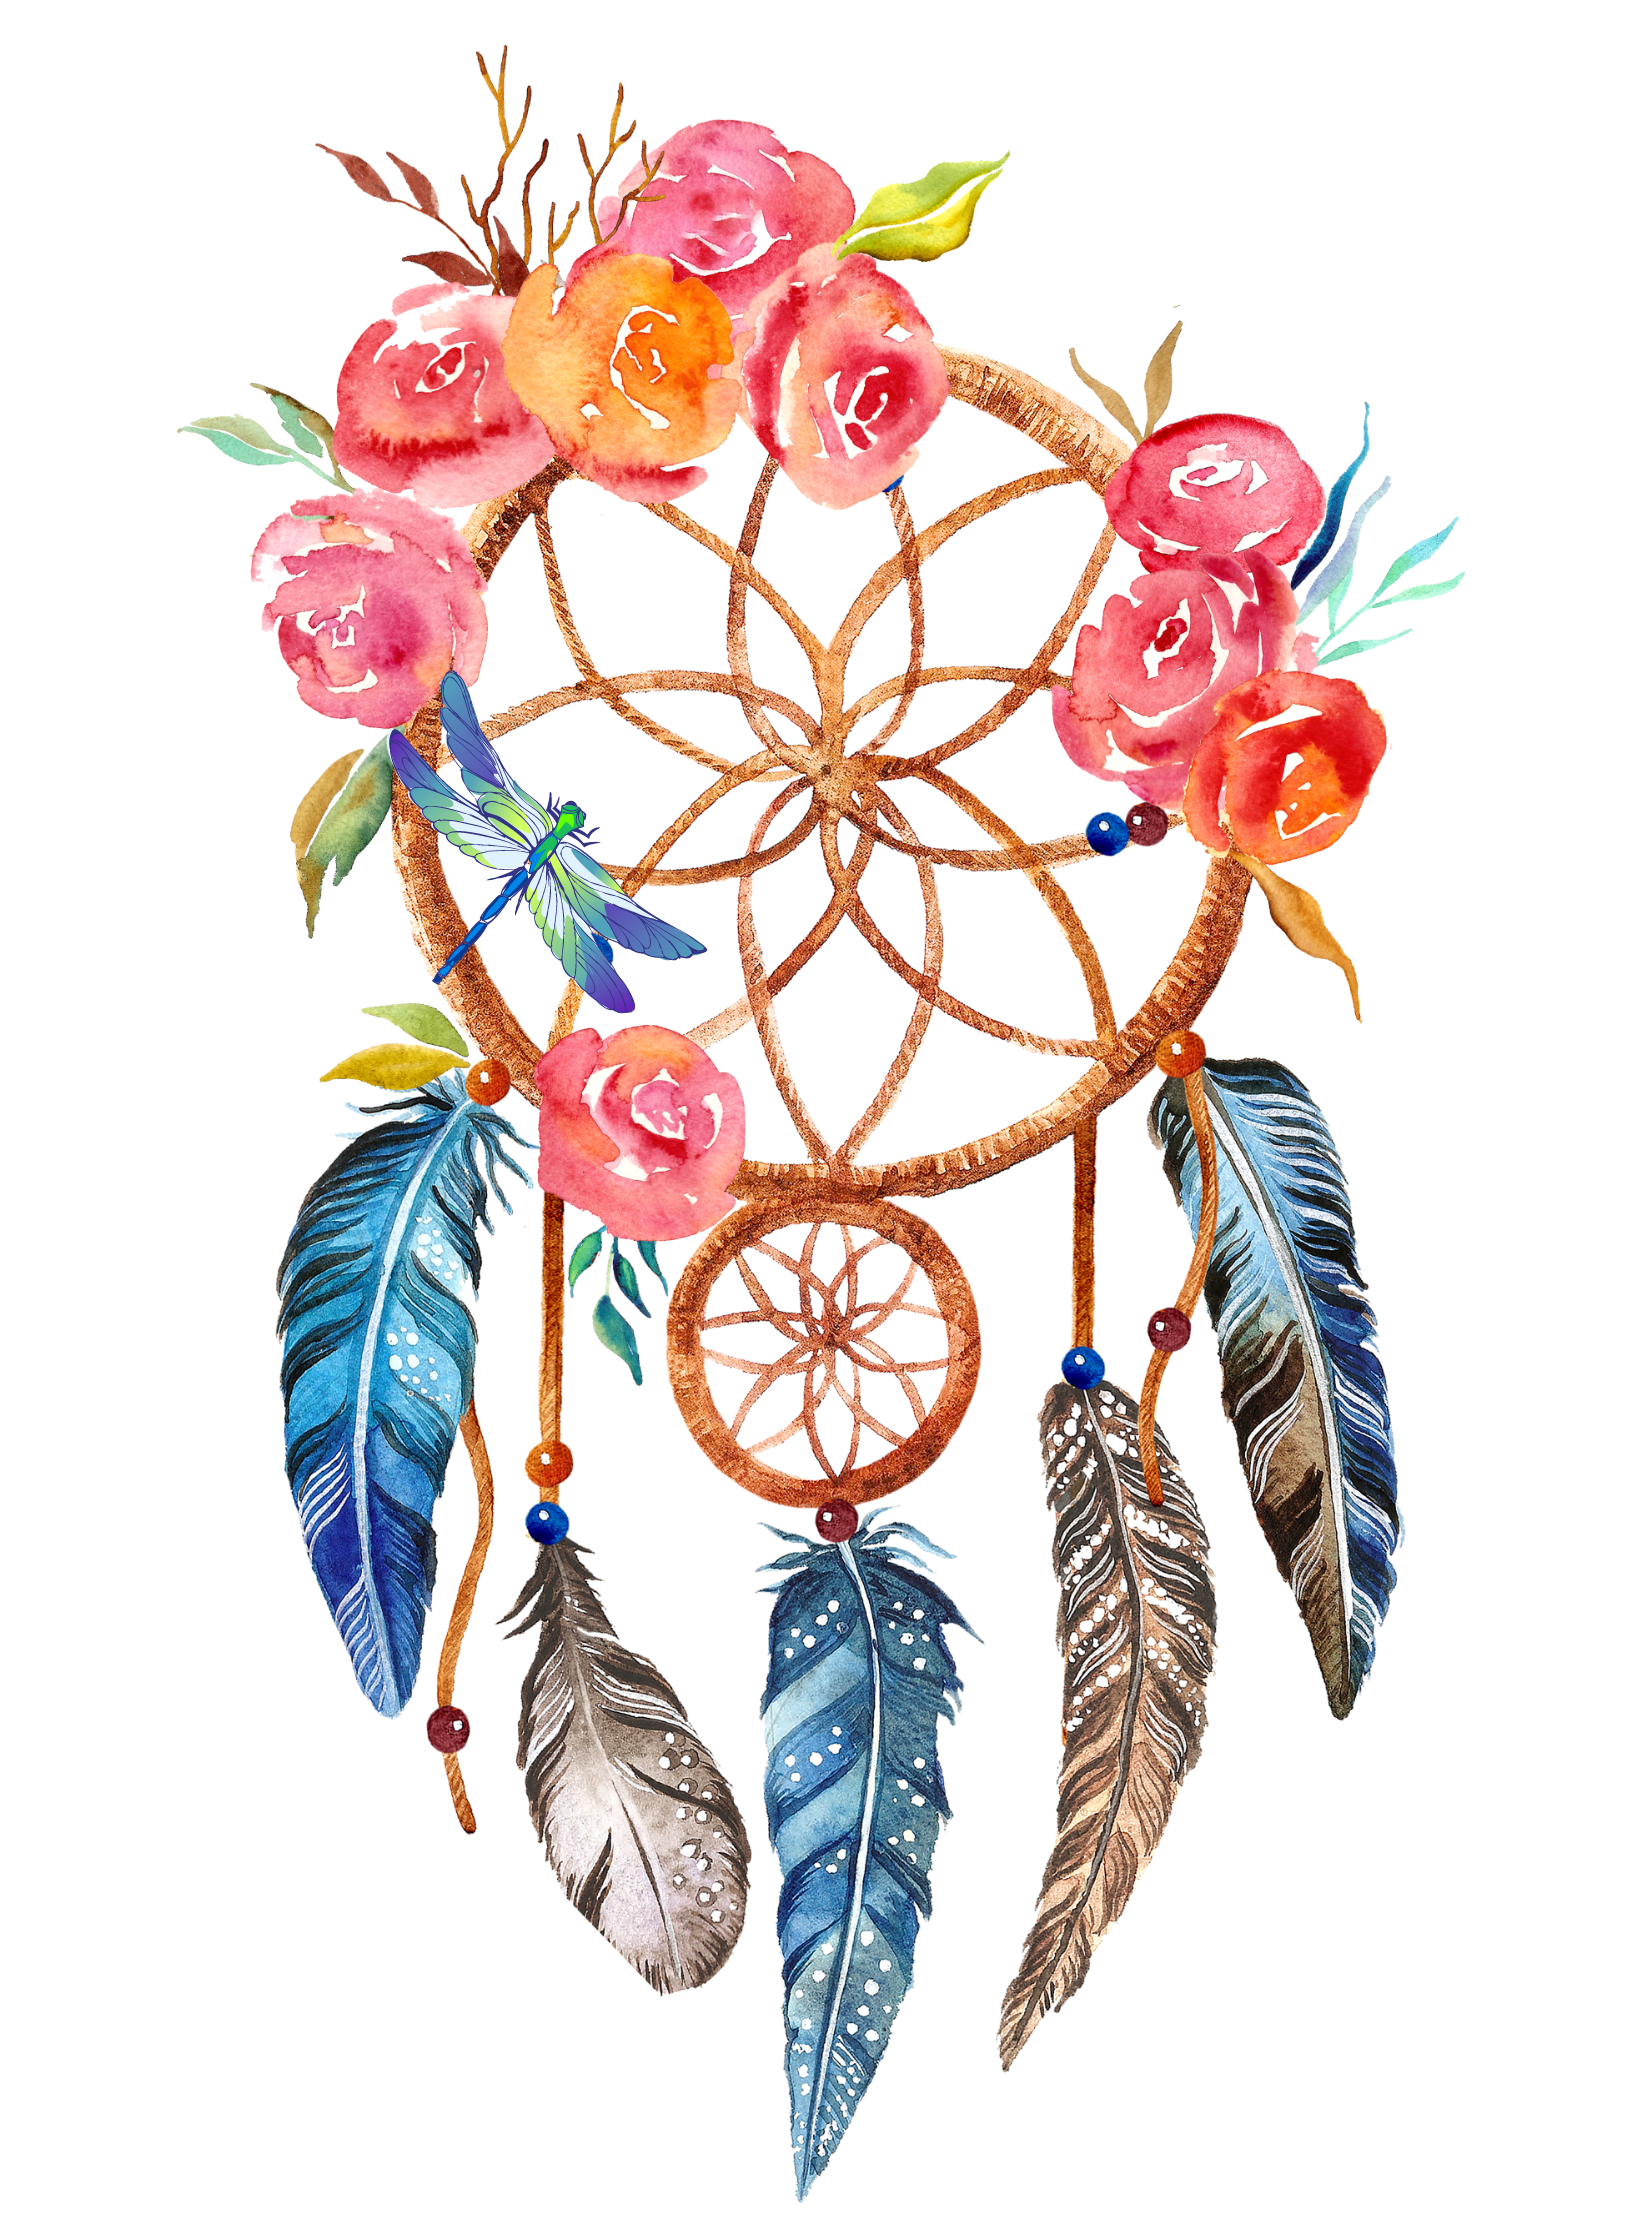 Network Dreamcatcher Graphics Boho-Chic Bohemianism Portable PNG Image